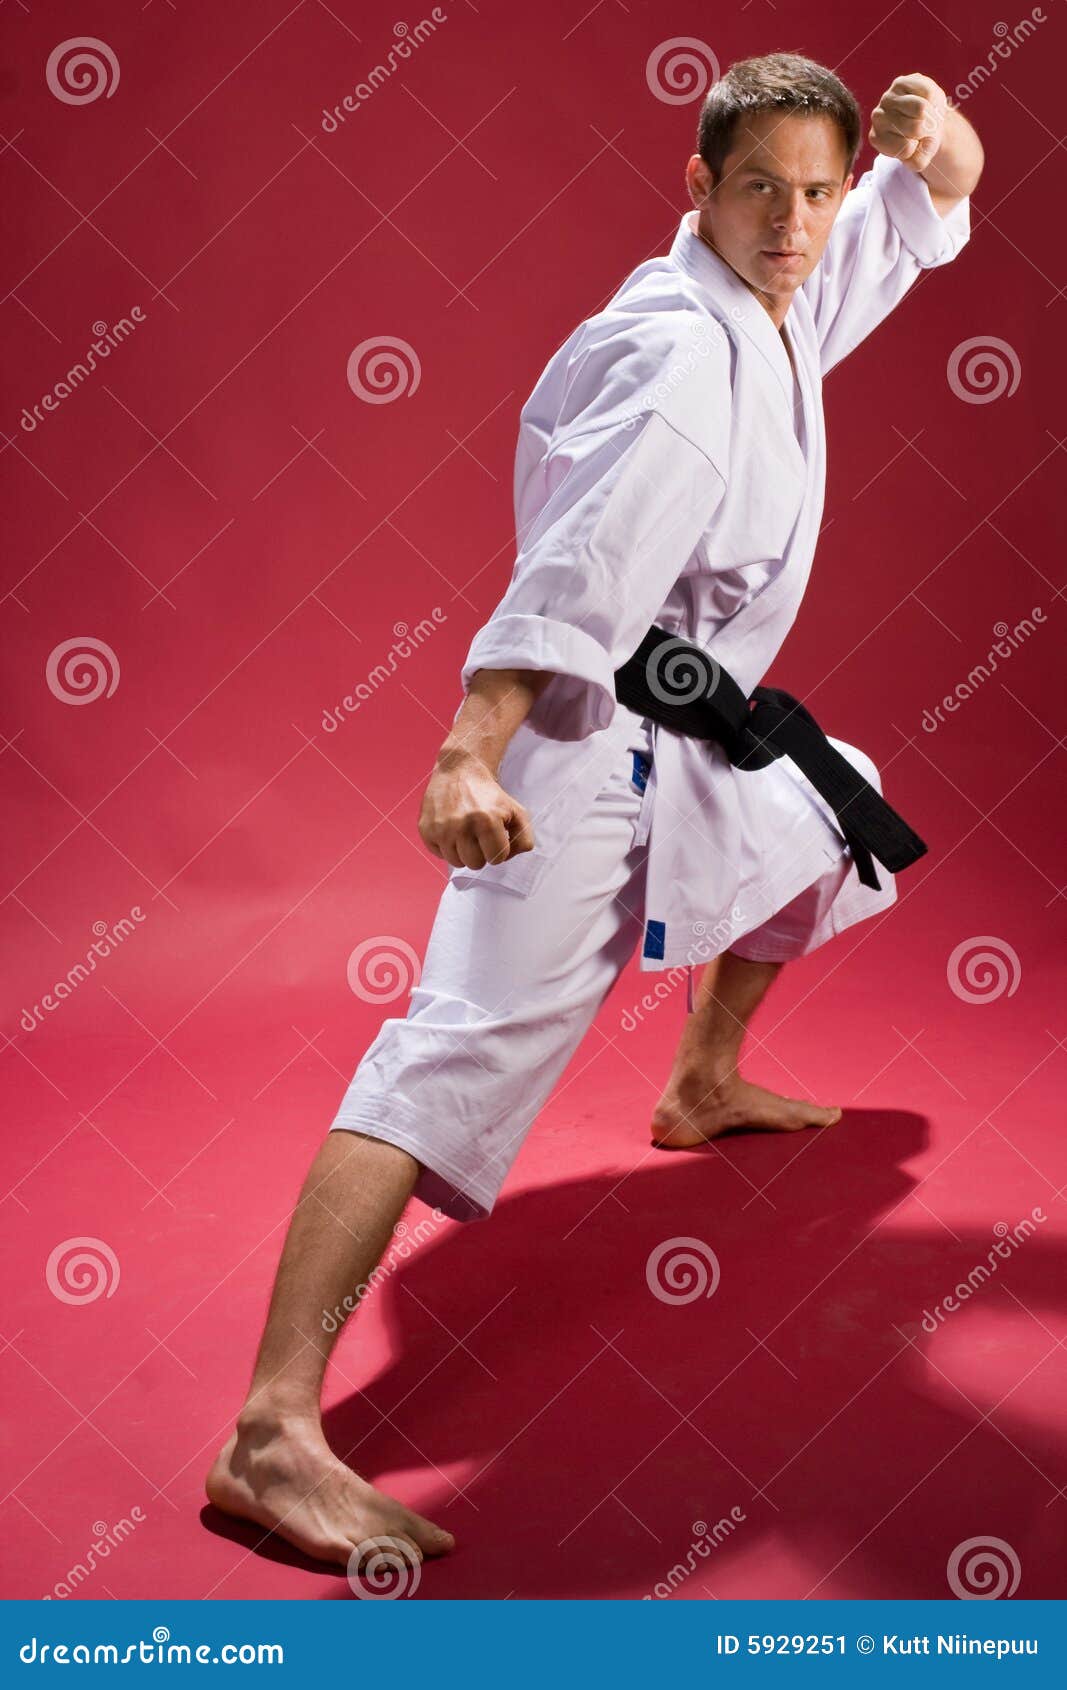 Karate Pose Vector Images (over 2,700)